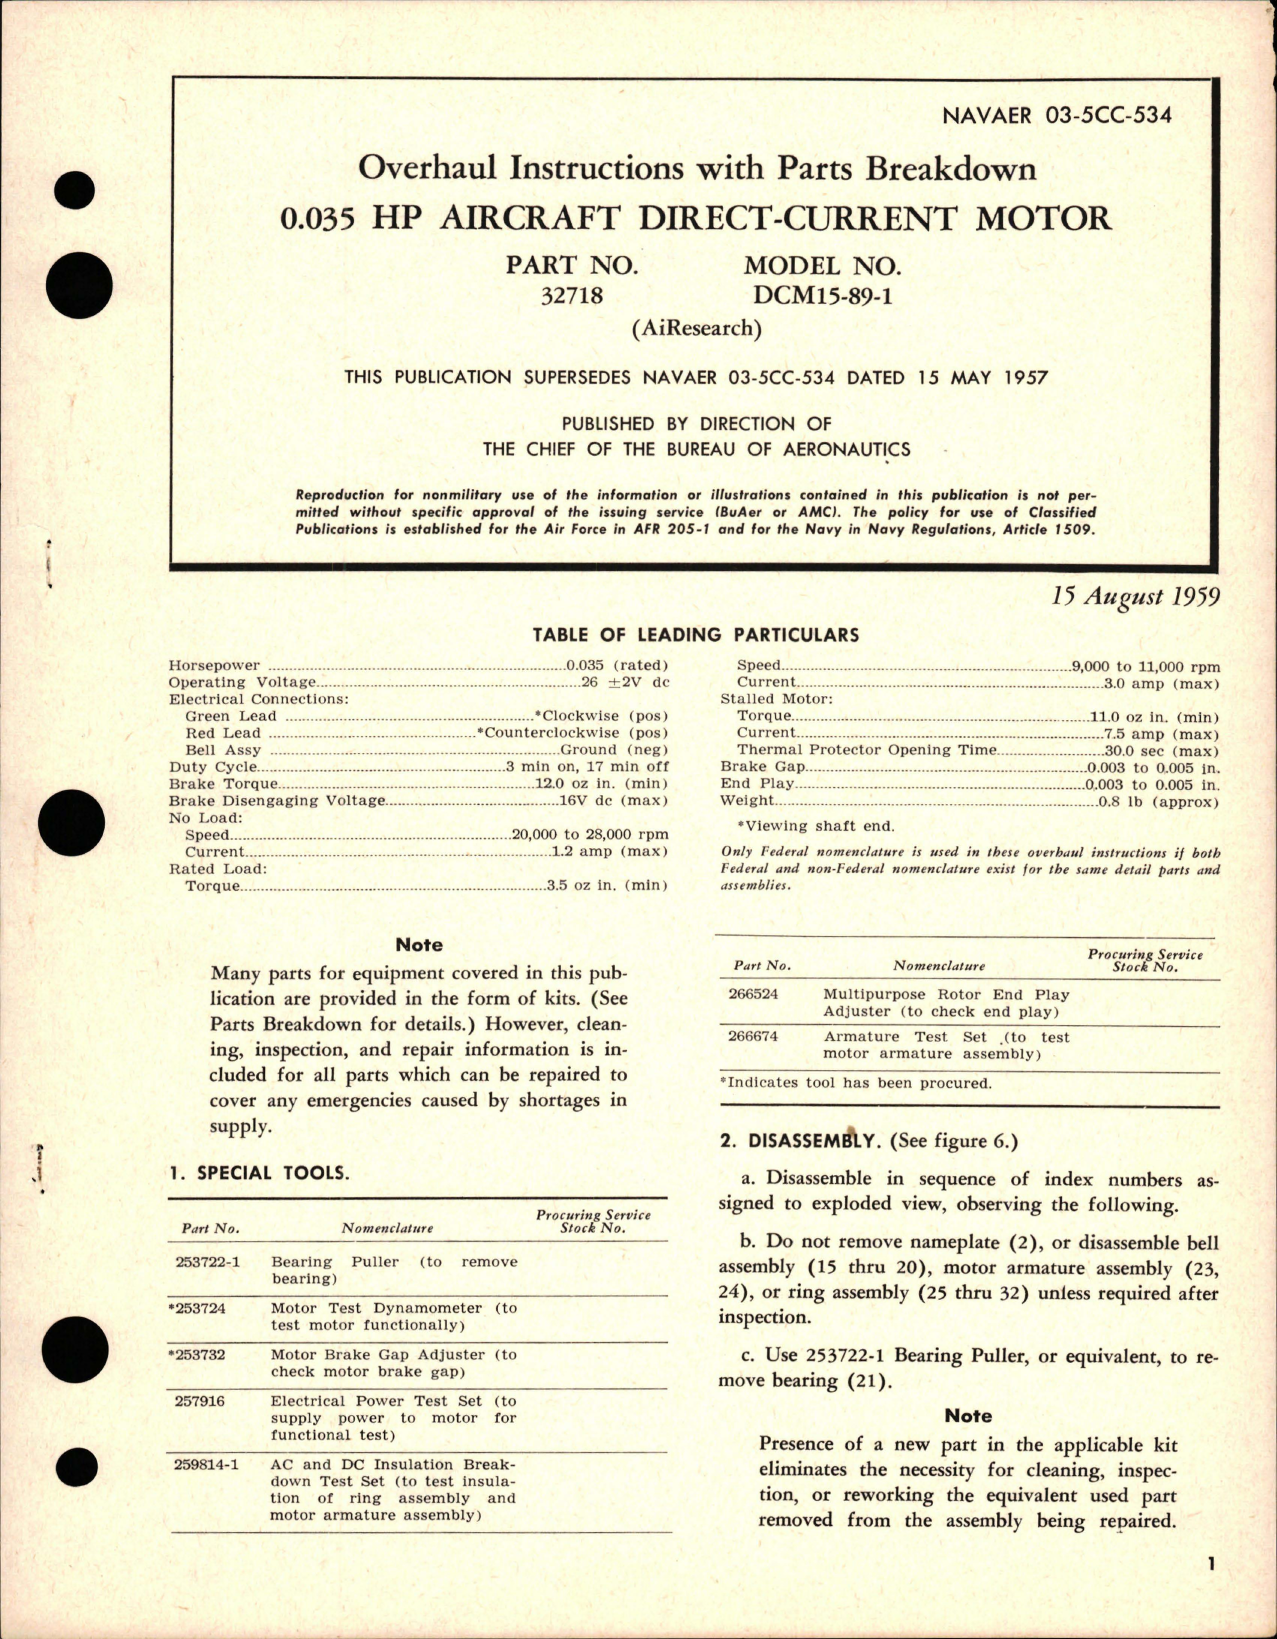 Sample page 1 from AirCorps Library document: Overhaul Instructions with Parts Breakdown for Direct-Current Motor 0.035 HP - Part 32718 - Model DCM15-89-1